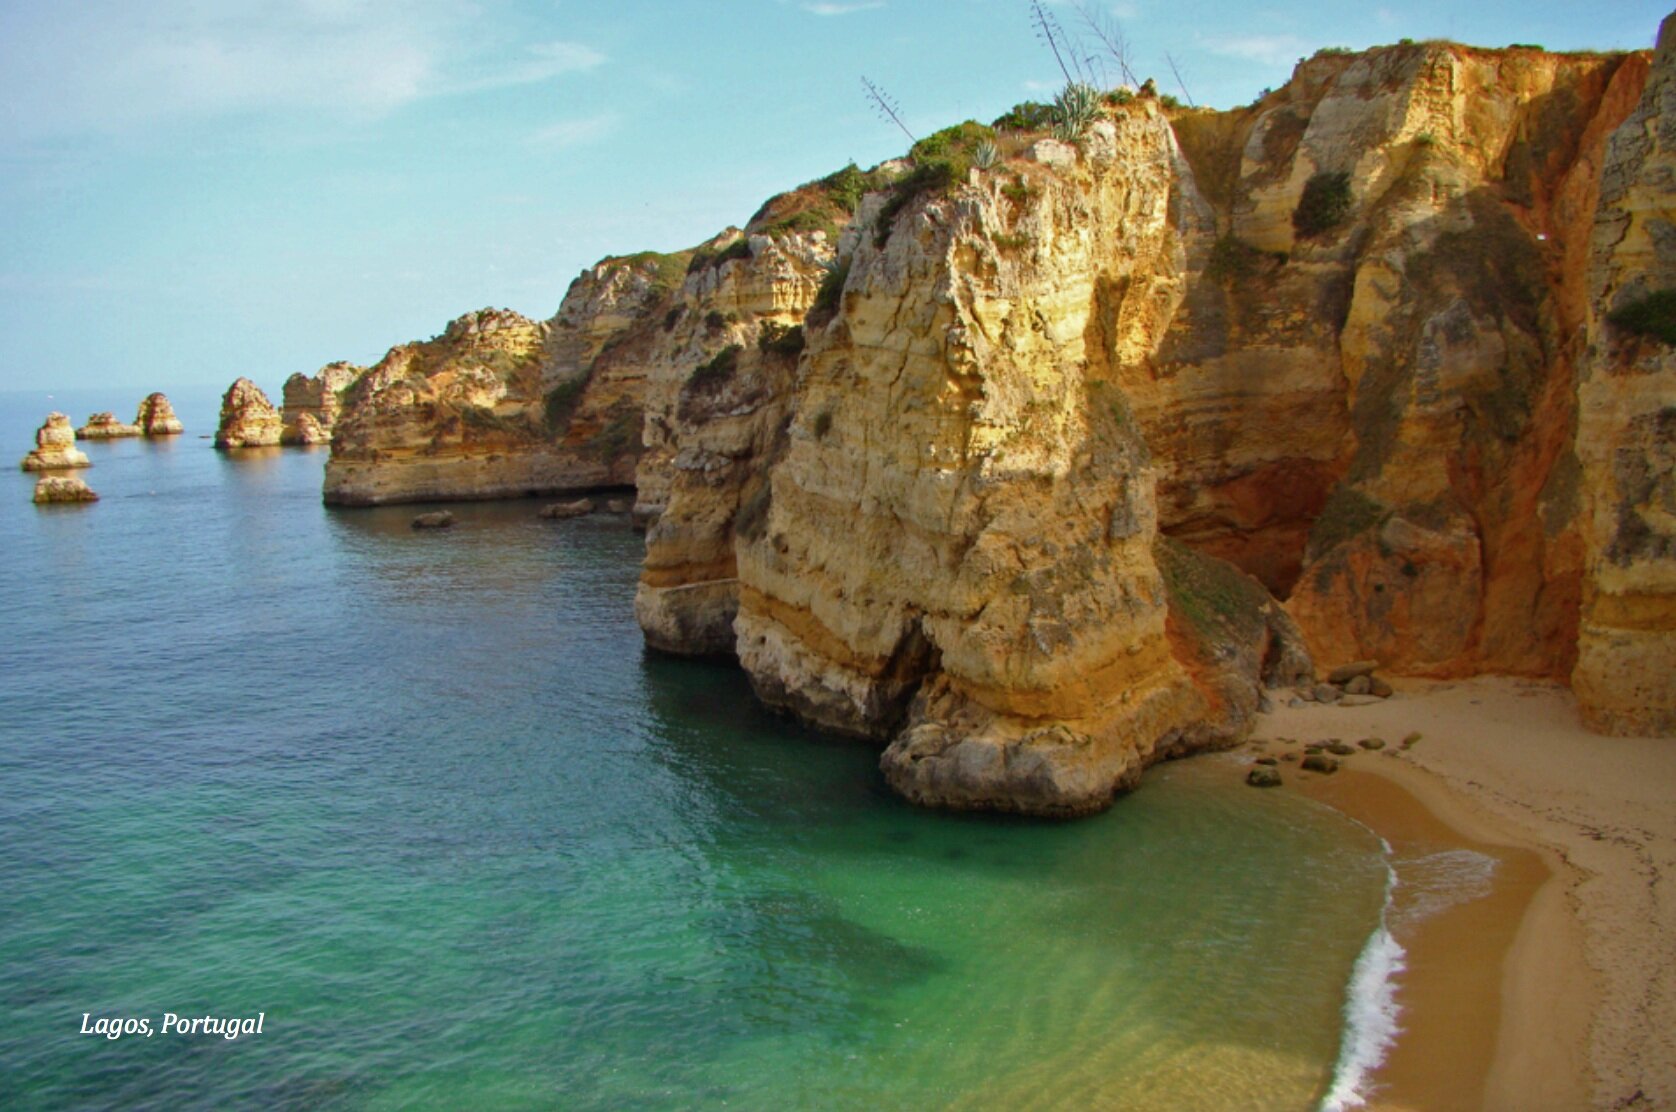  Kayak through beautiful sea caves and rock foundations along the coast of Portugal   Visit the school of the Navigators and be inspired by the stories of explorers like Colombus and Vasco De Gama   Swim and surf on beautiful white sand beaches   Try